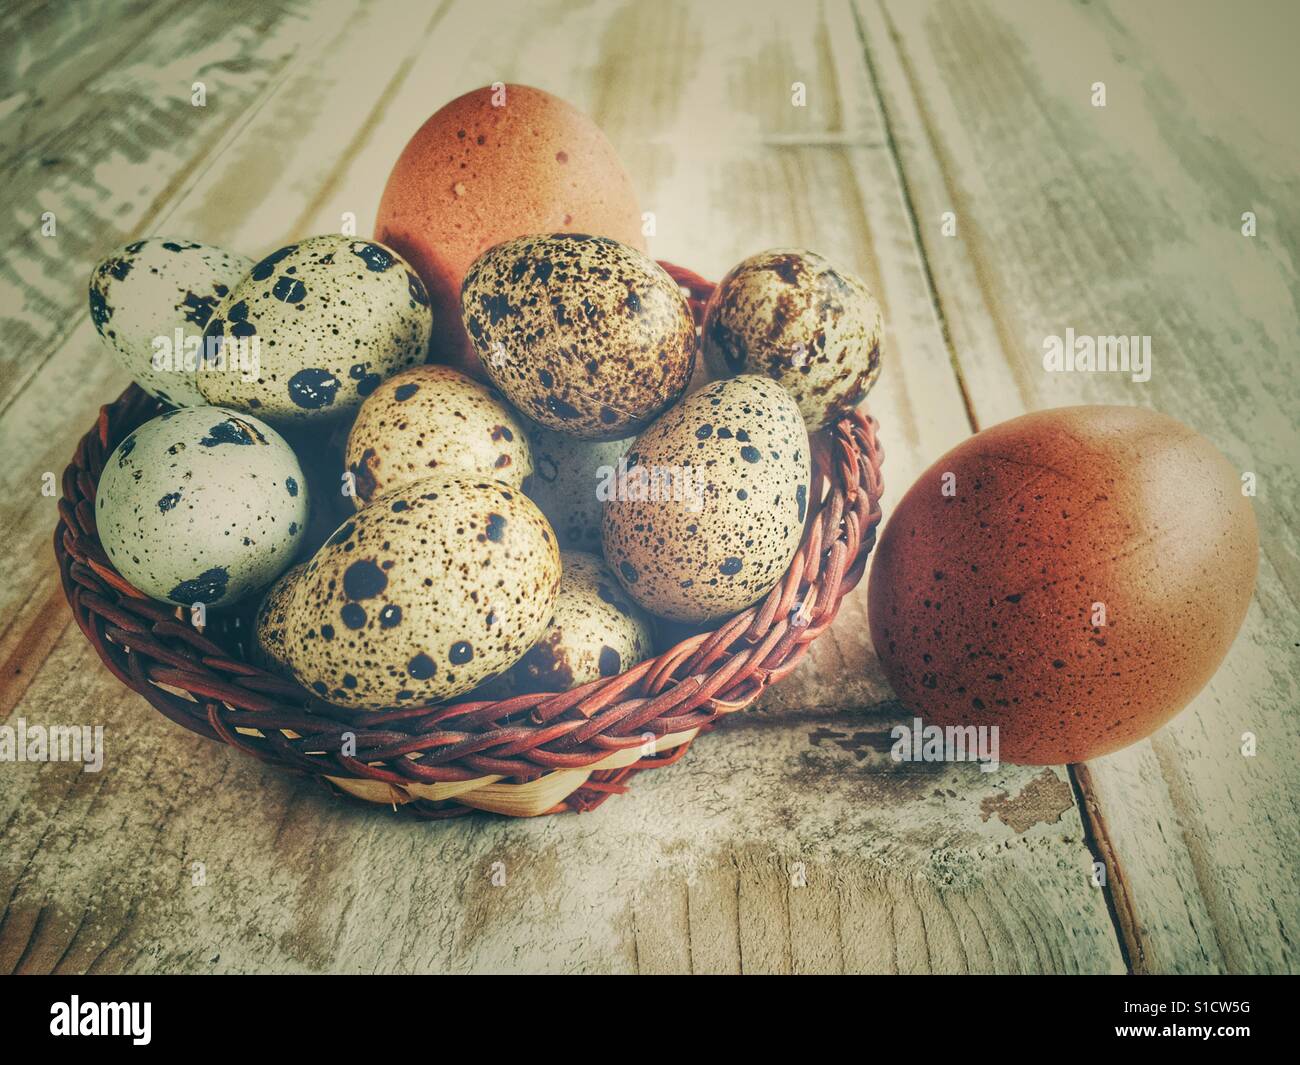 Quail's eggs and chicken's eggs Stock Photo